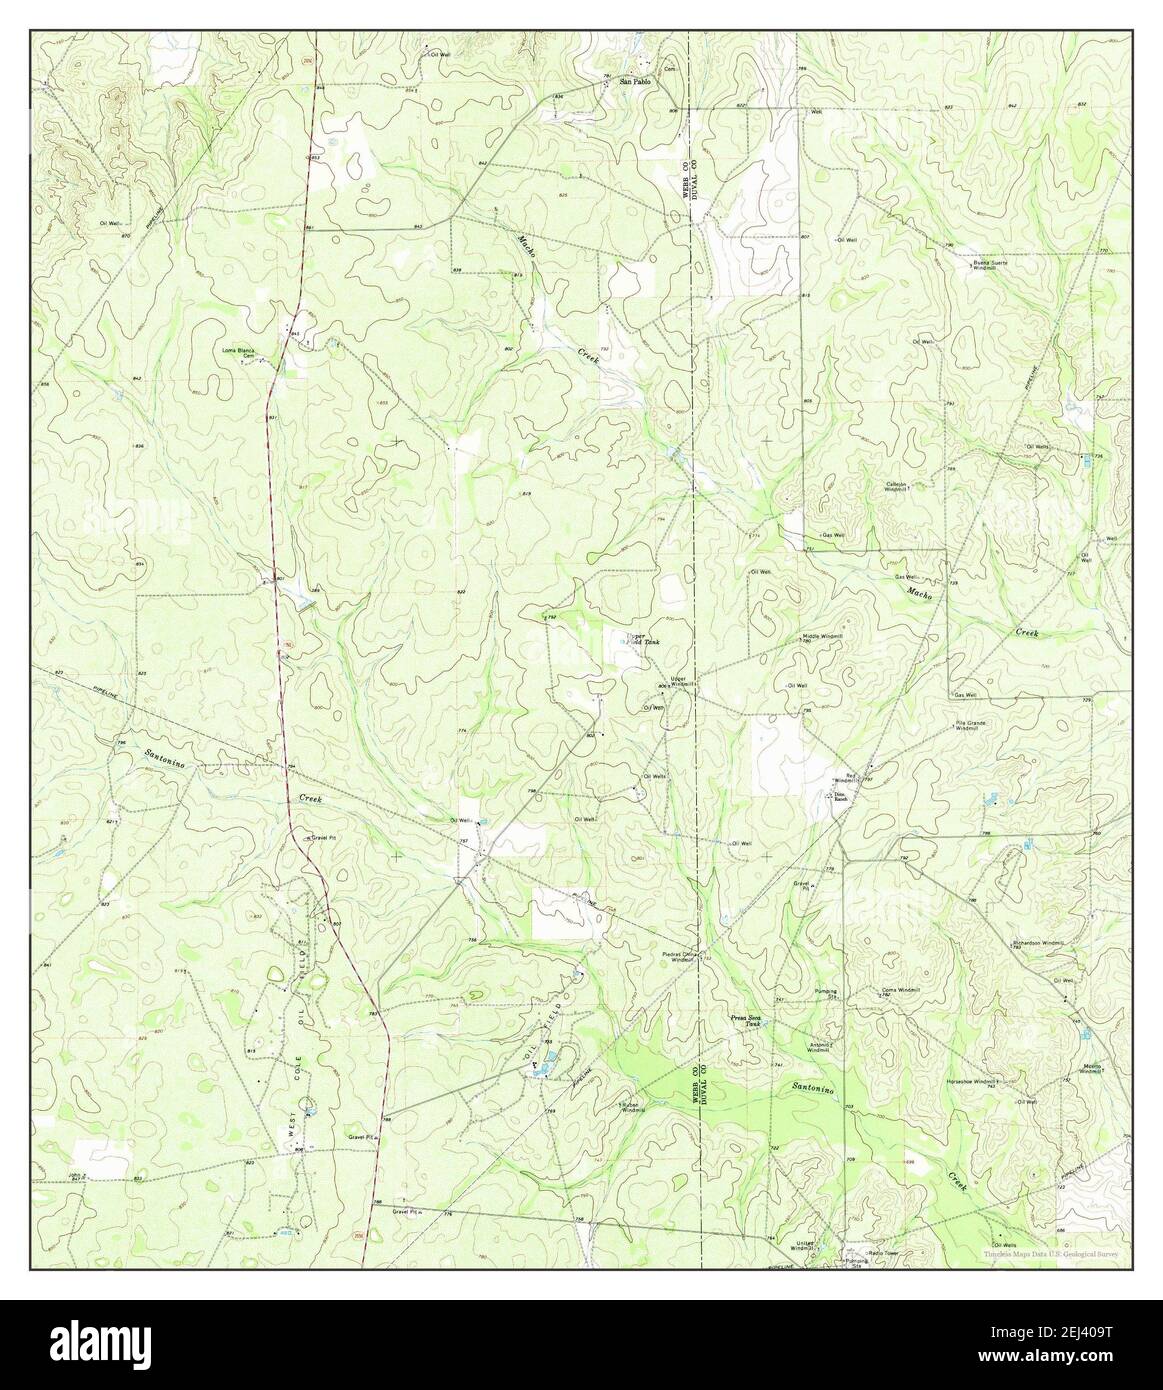 San Pablo, Texas, map 1968, 1:24000, United States of America by Timeless Maps, data U.S. Geological Survey Stock Photo